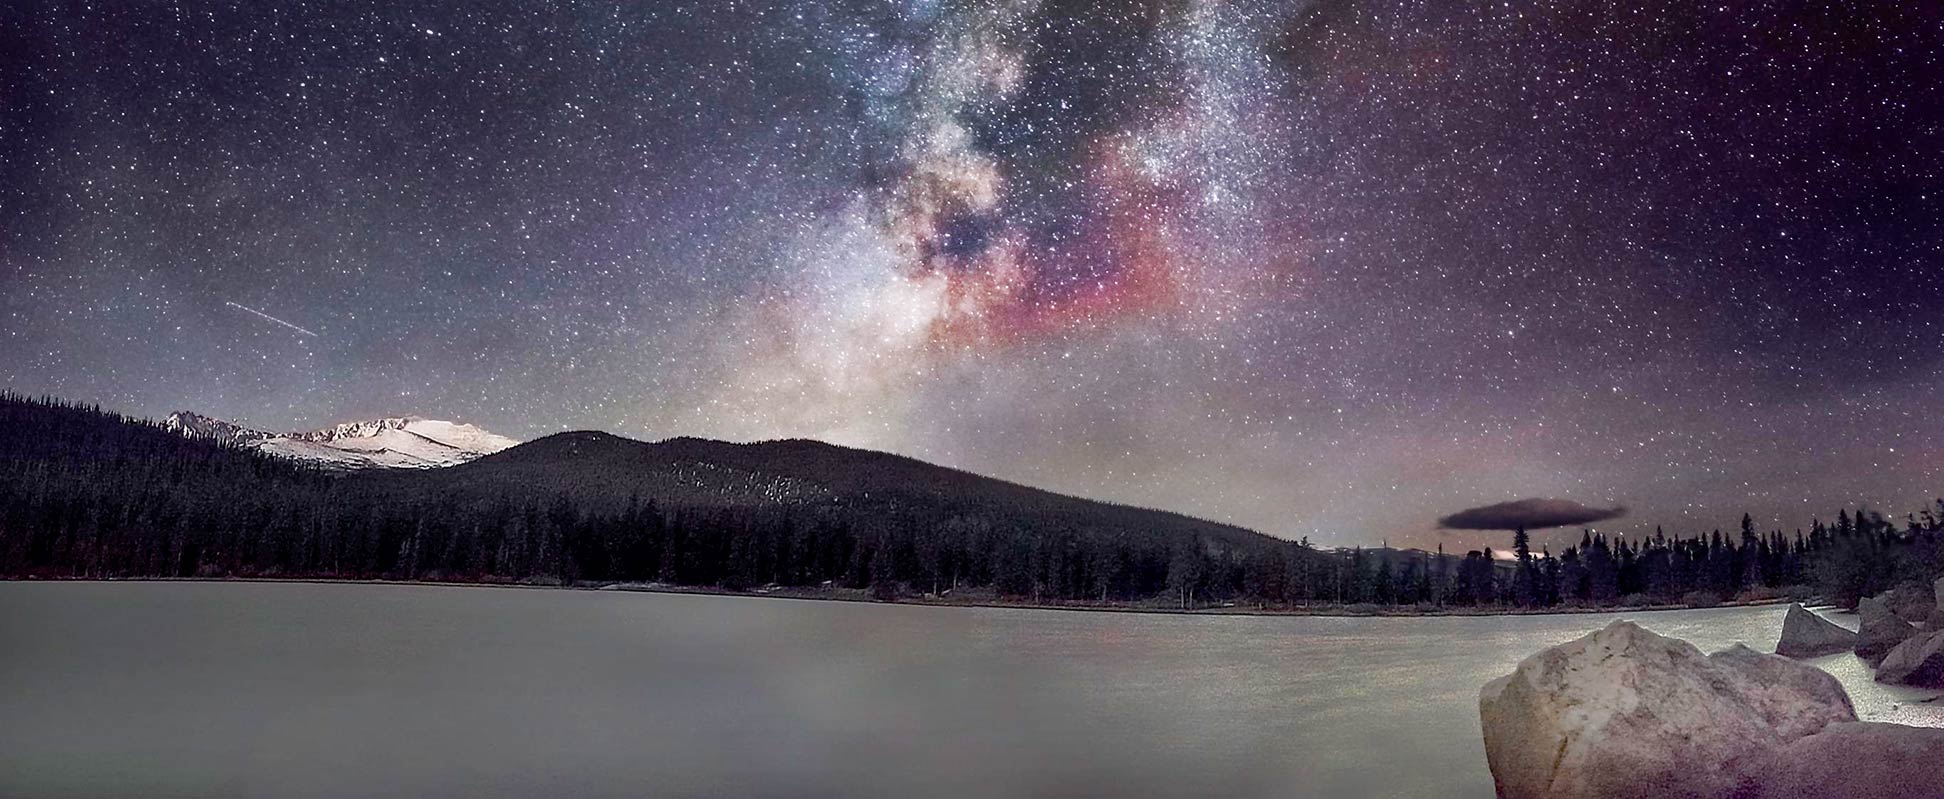 View of the Milky Way over Echo Lake in Colorado